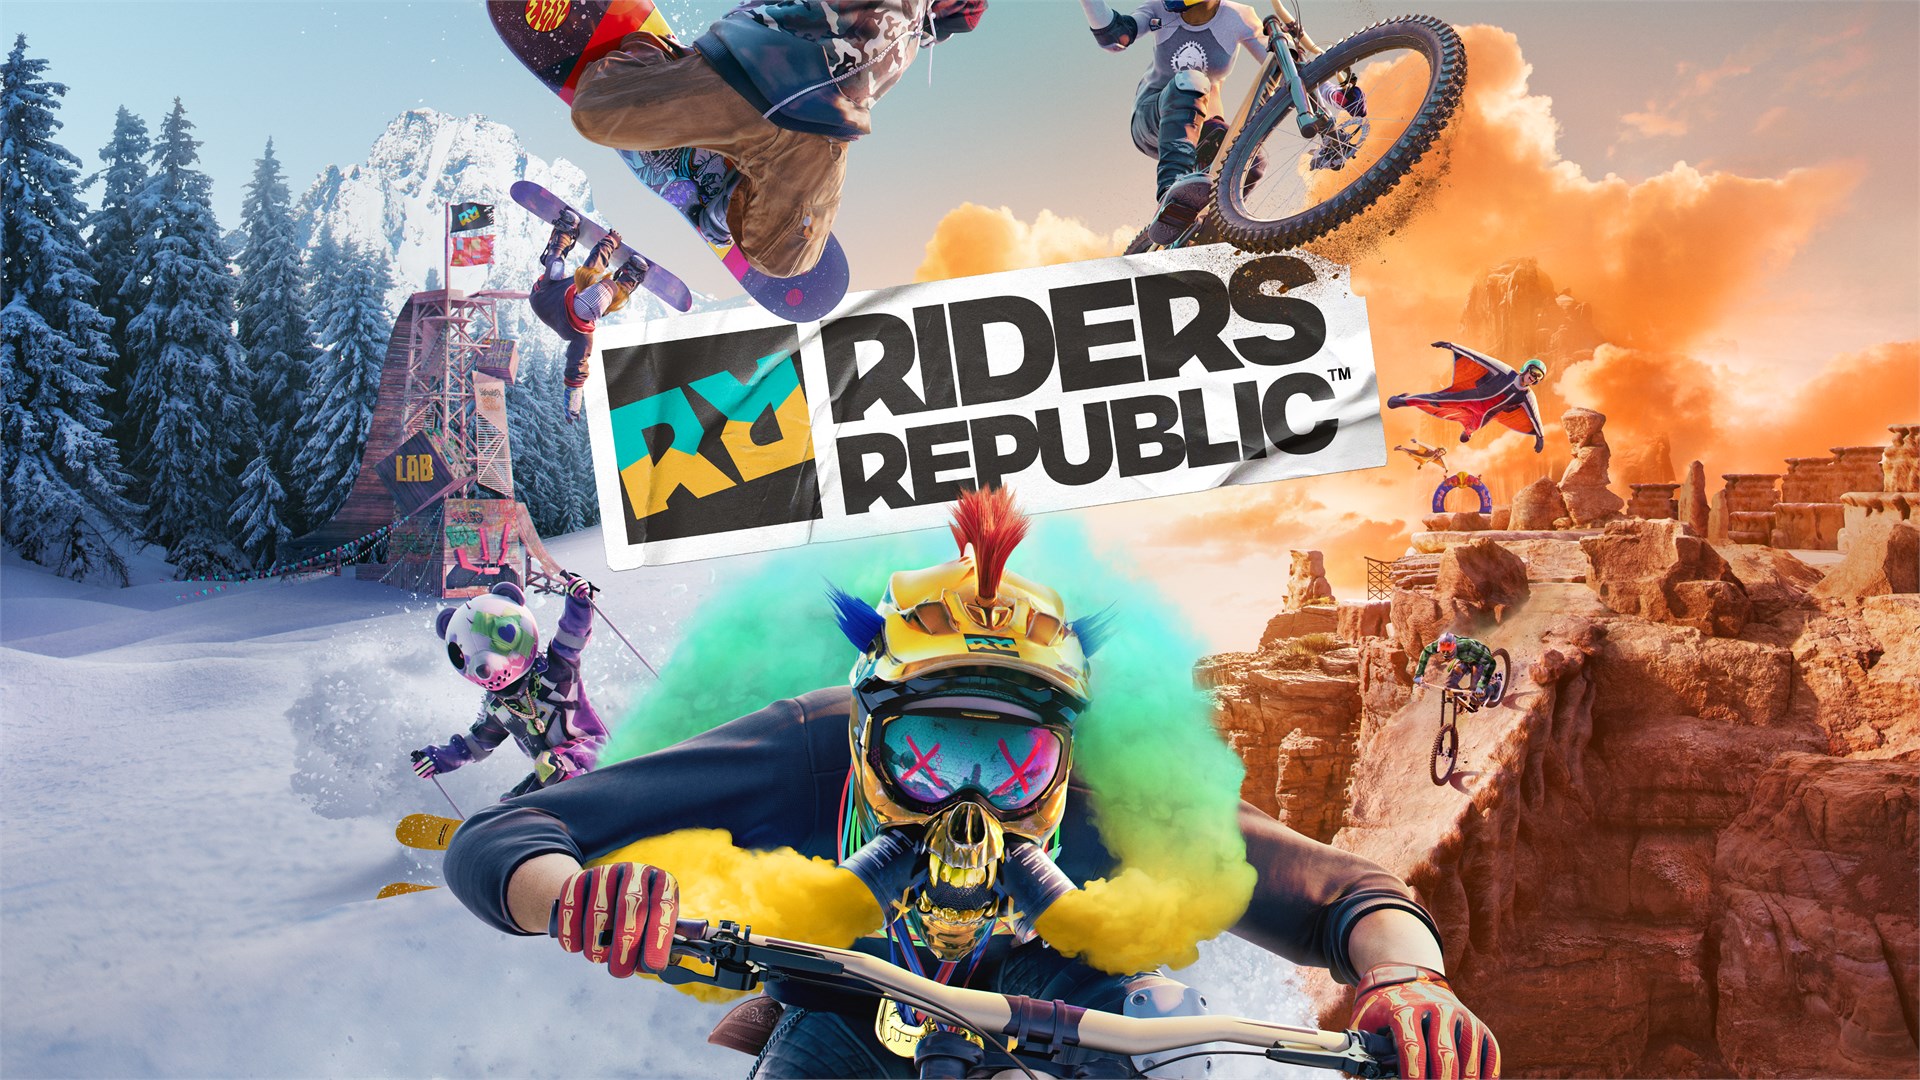 Video For Riders Republic Is Now Available For Digital Pre-order And Pre-download On Xbox One